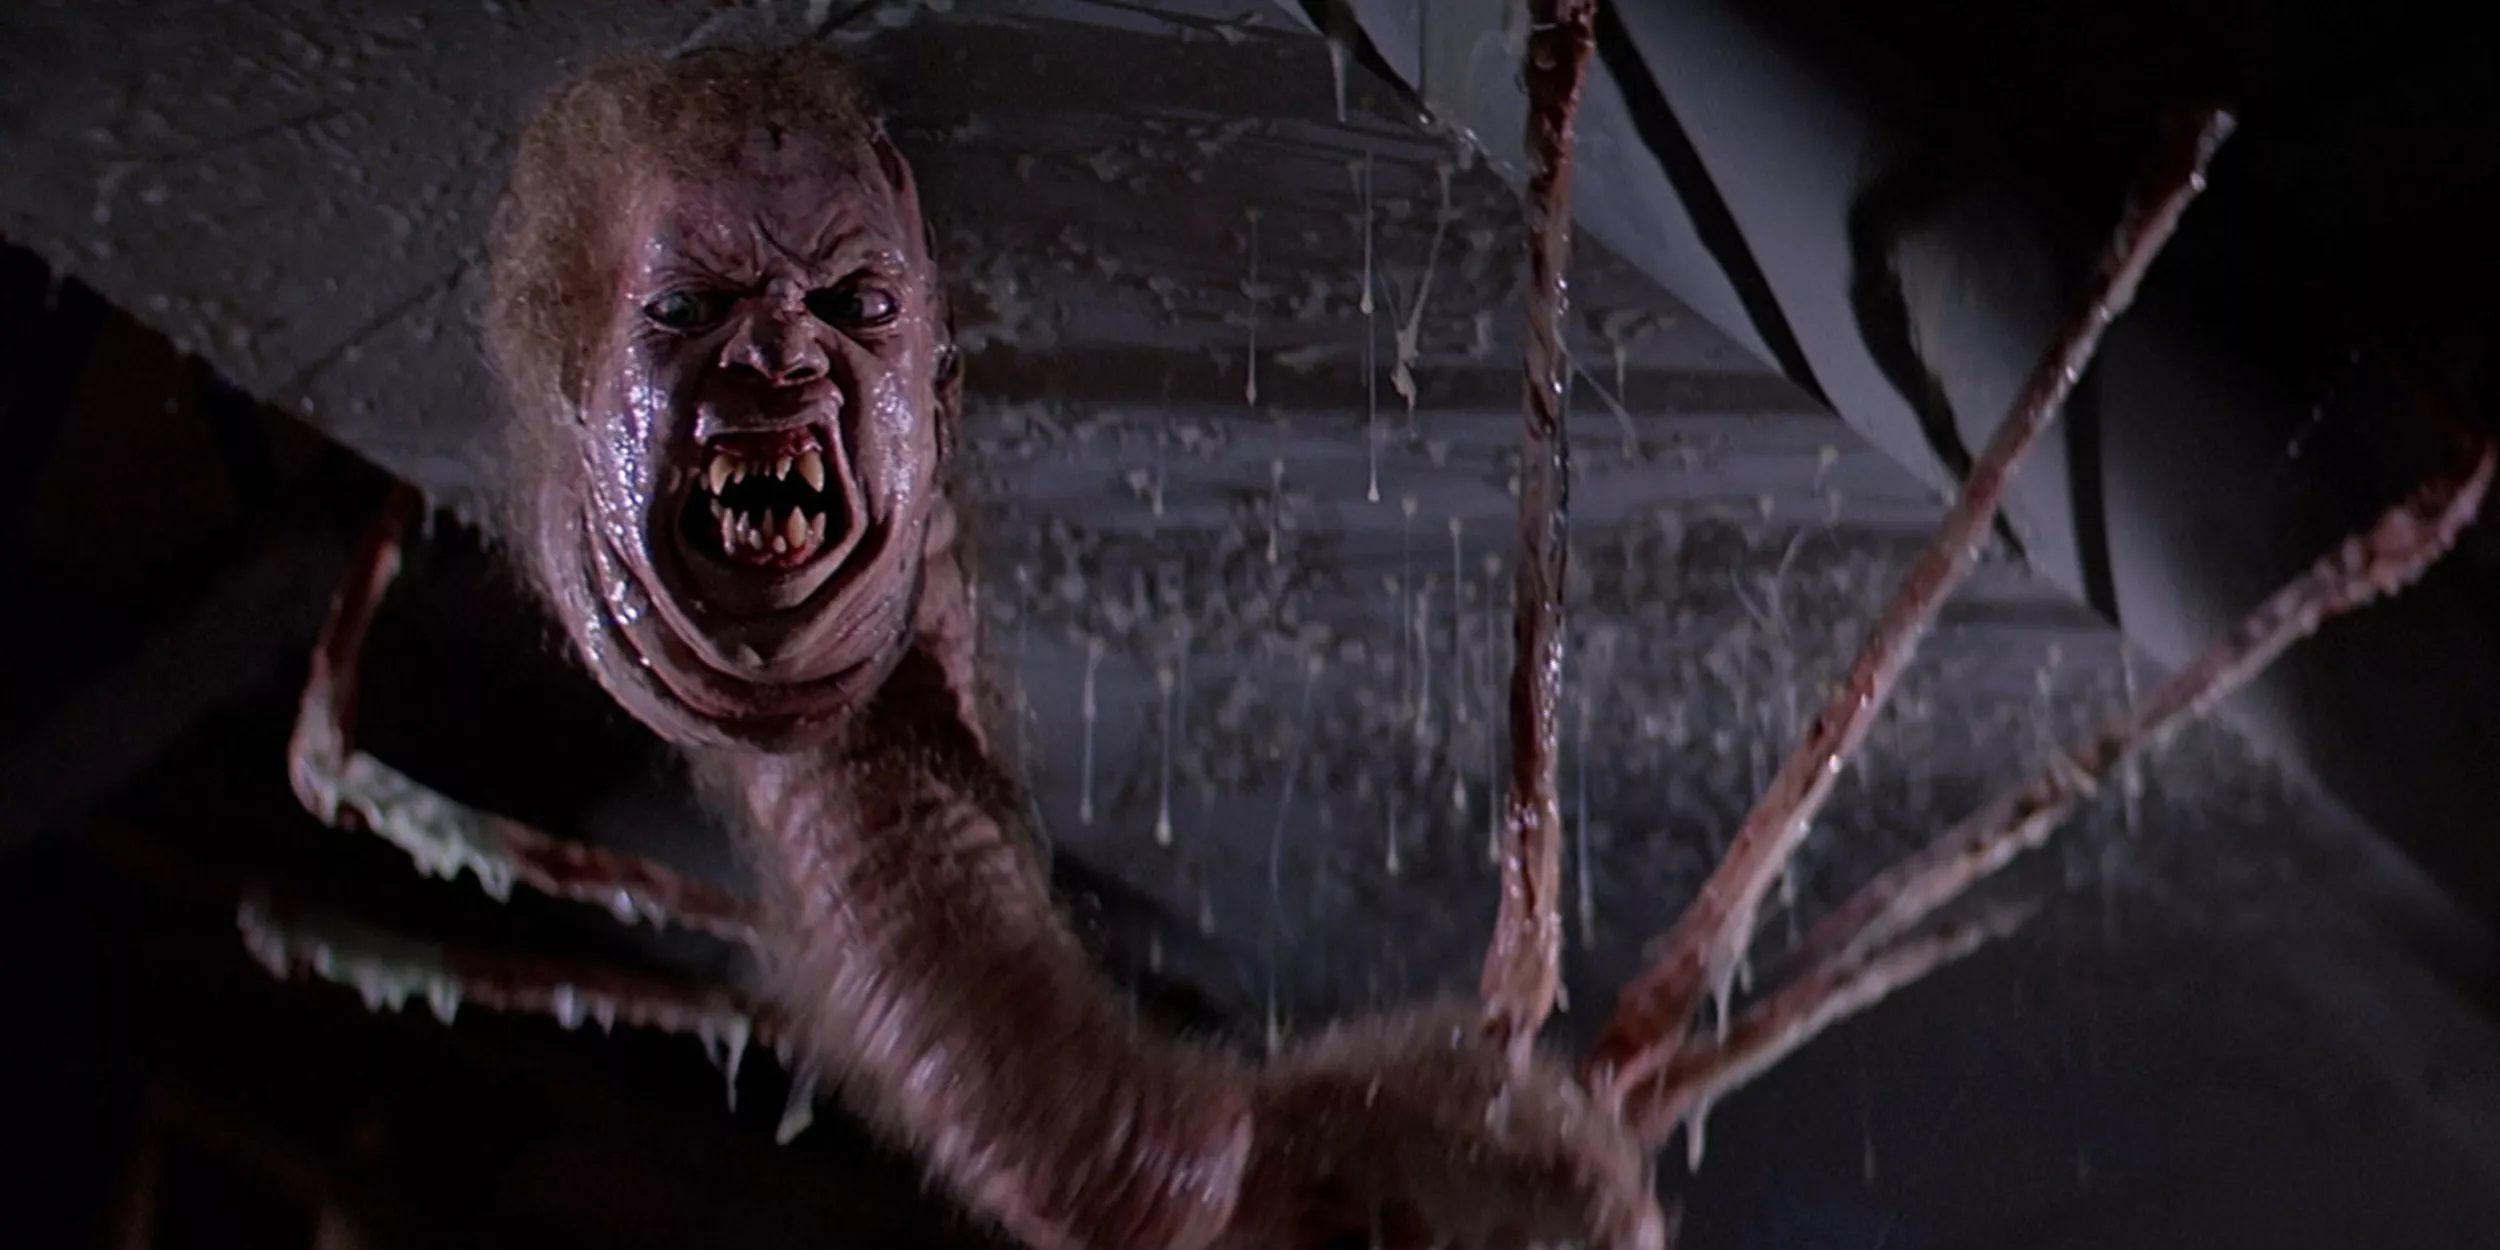 The alien latches to the ceiling in The Thing